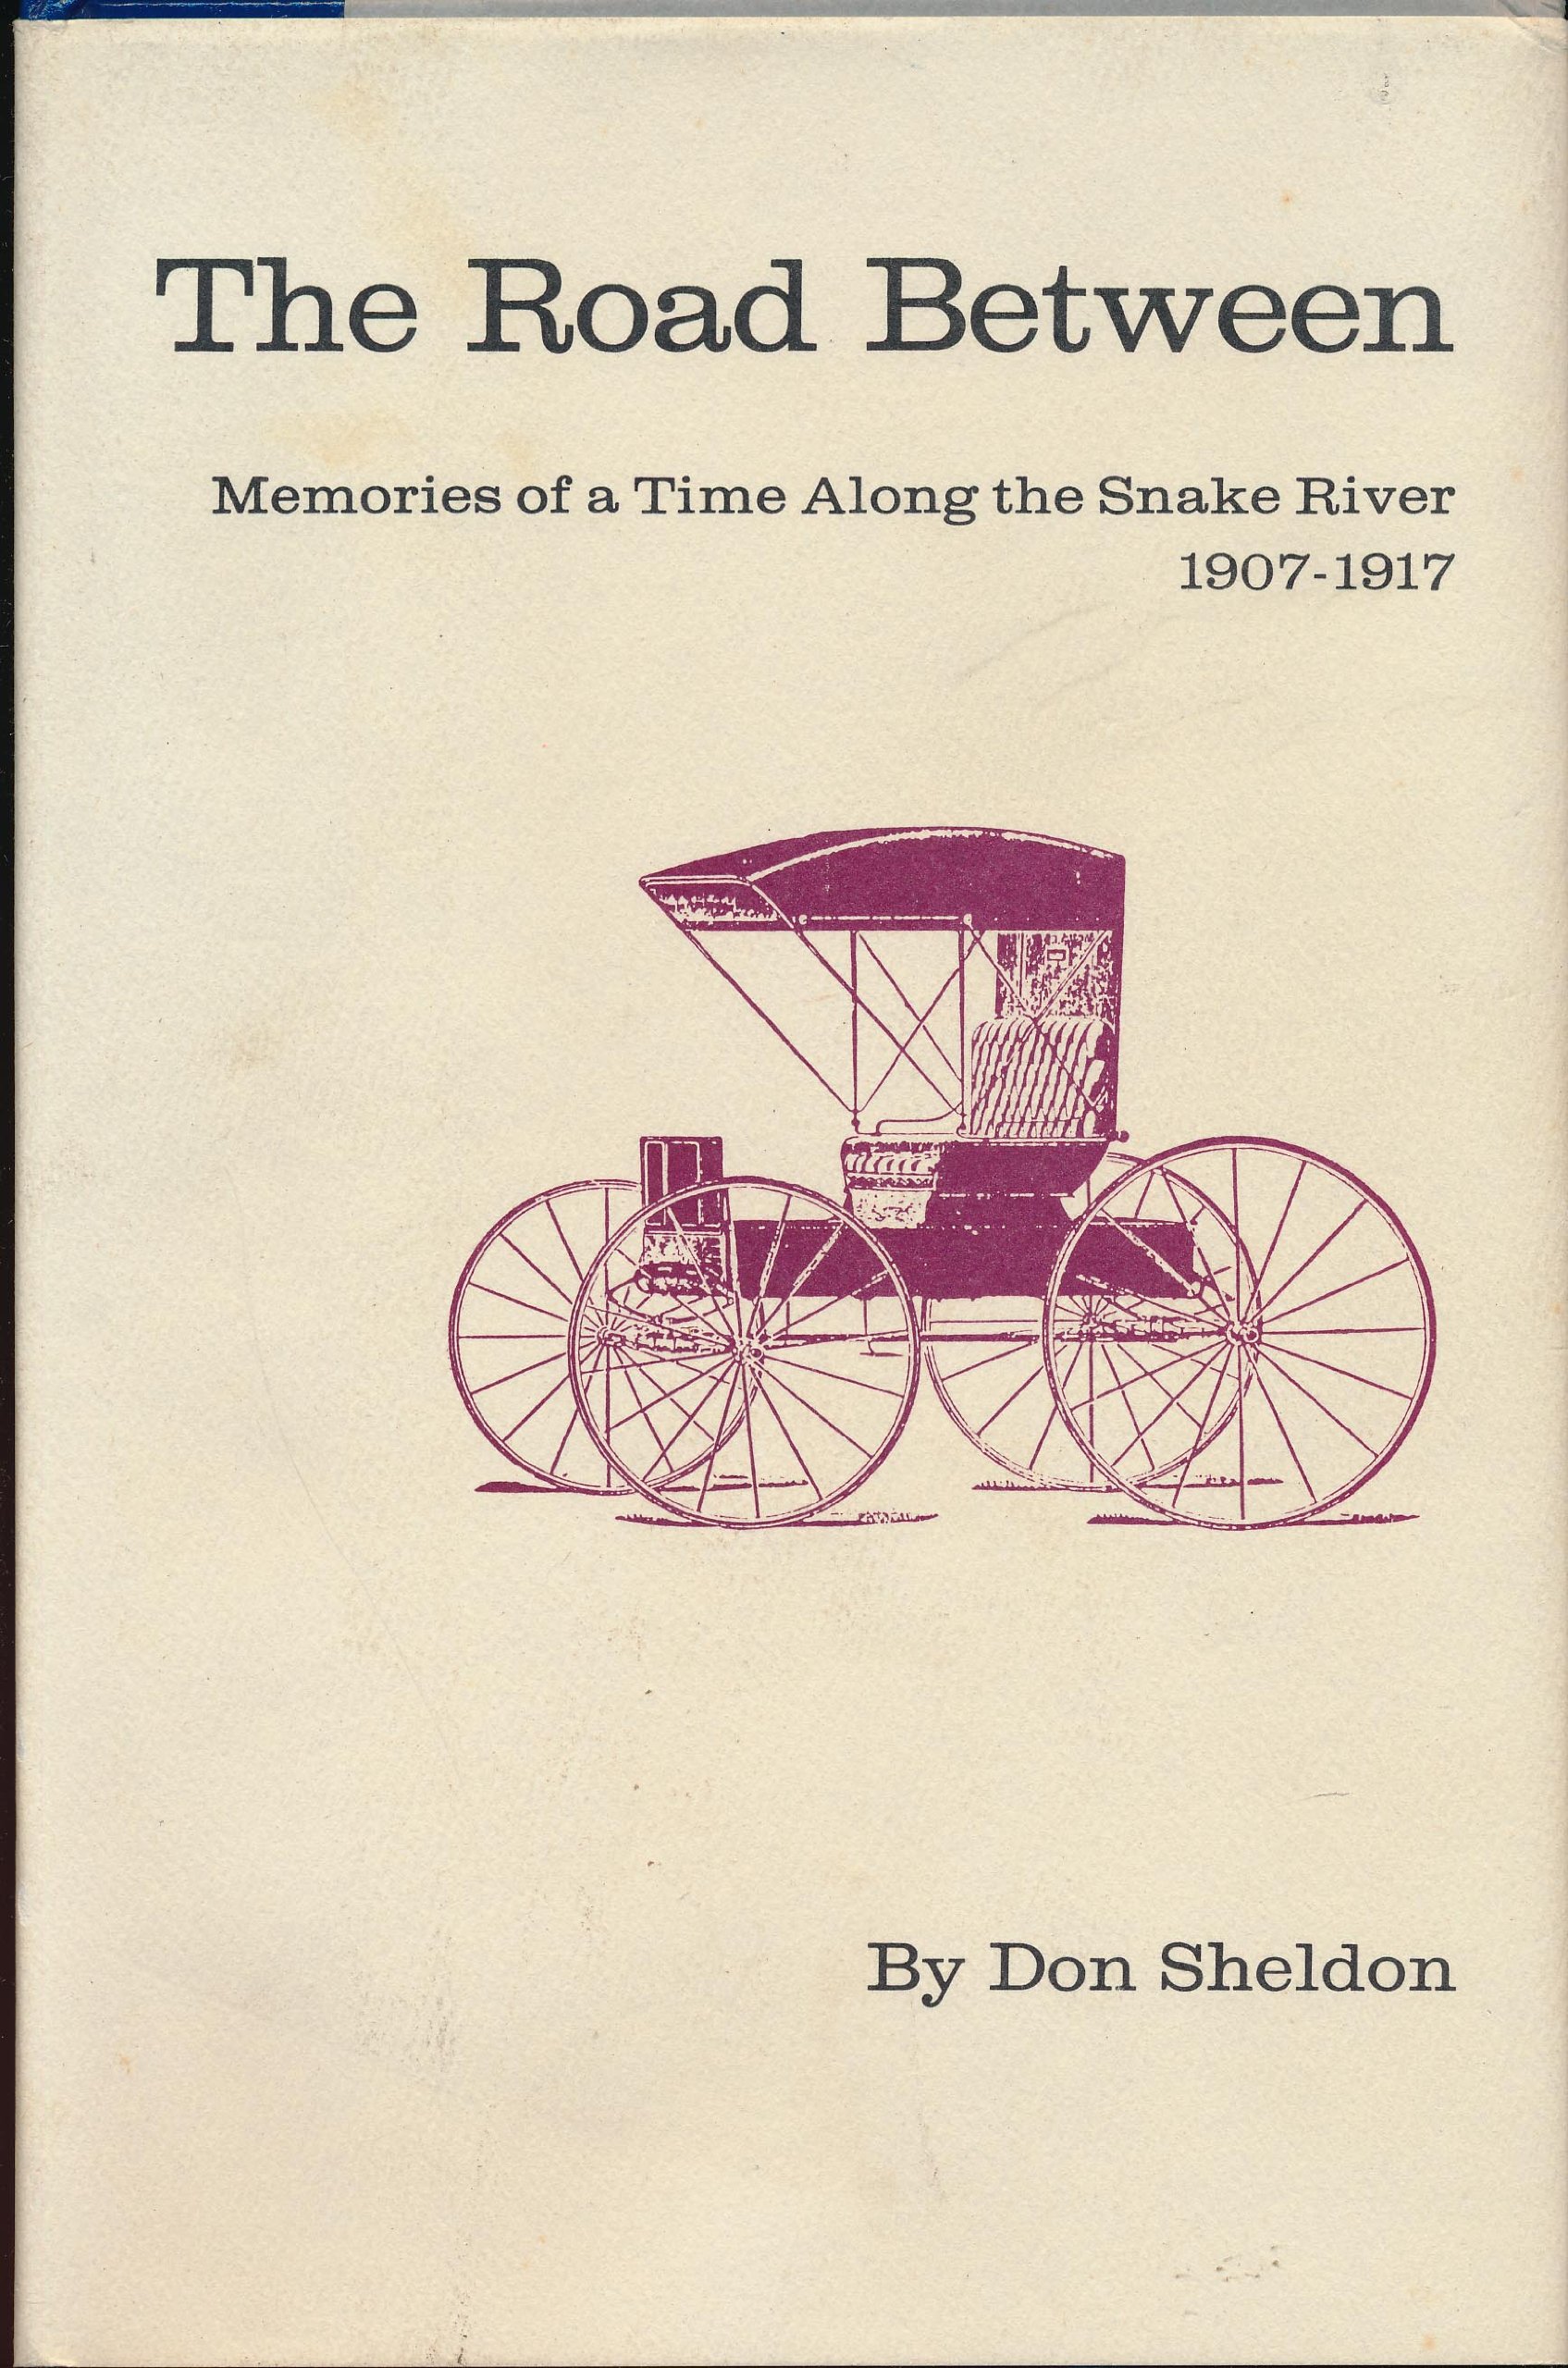 The road between: Memories of a time along the Snake River, 1907-1917 (book cover)